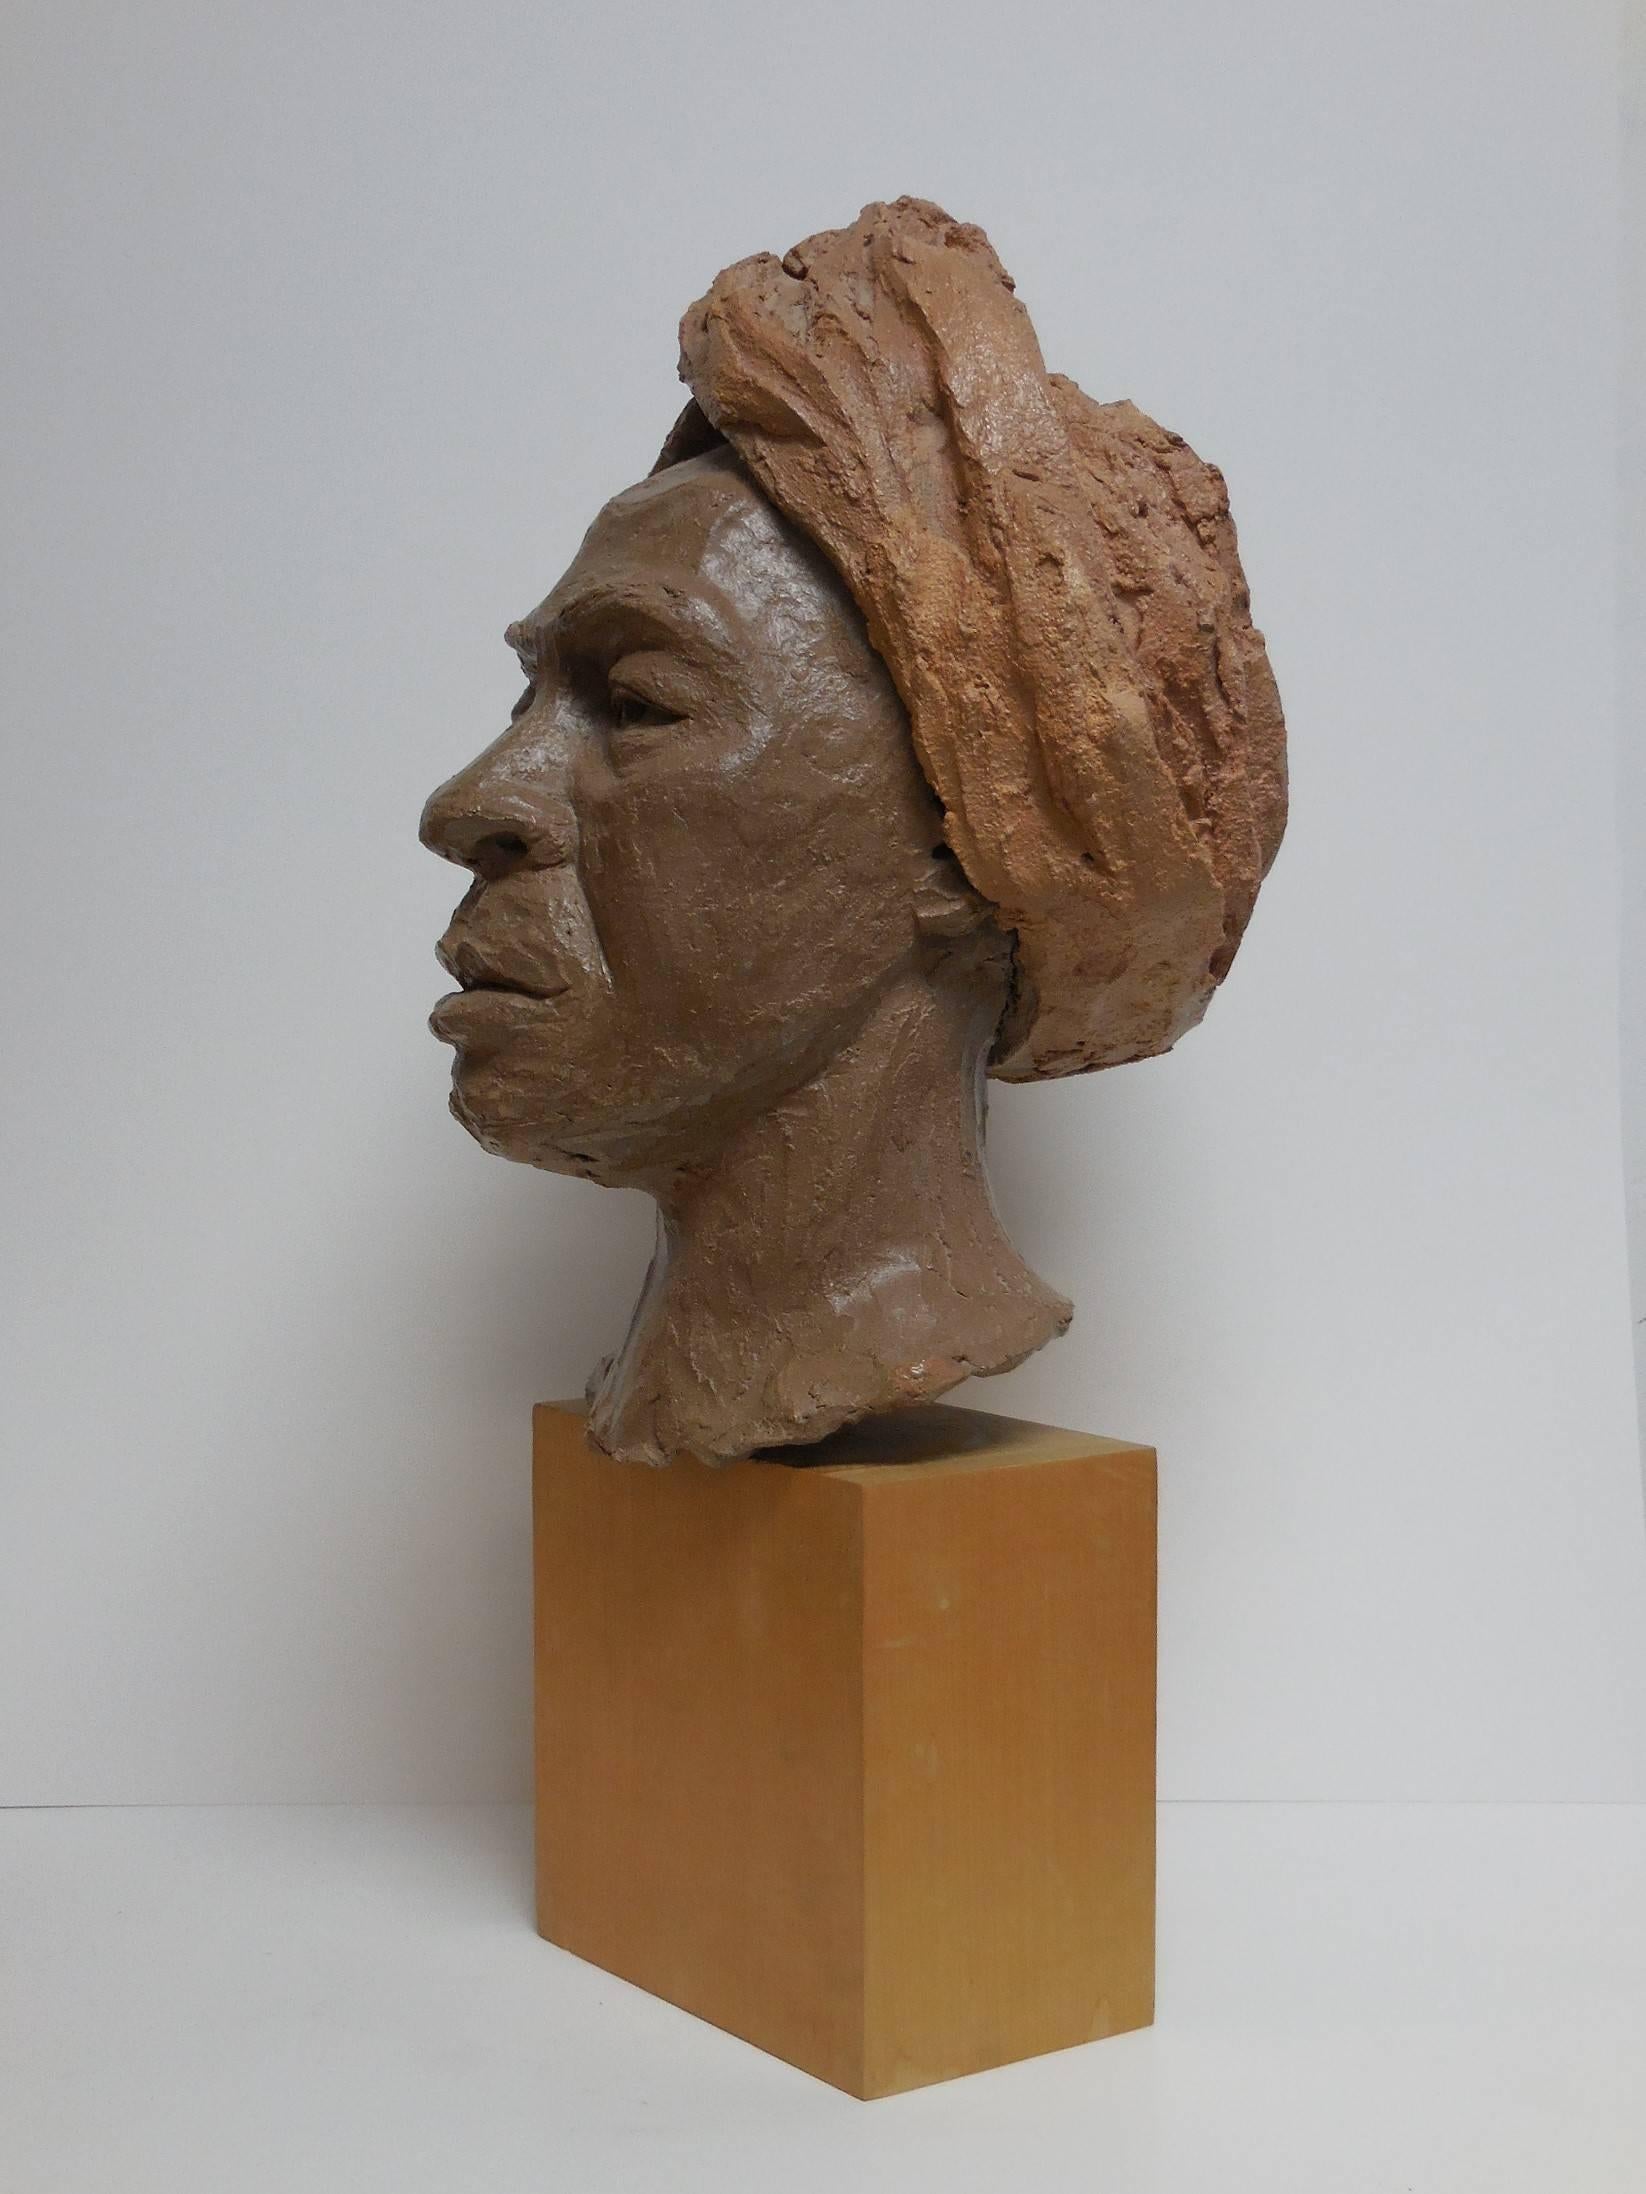 A life-size sculpture, terracotta on a wood base. Extremely well done with lots of detail. Signed on back. Head is 14